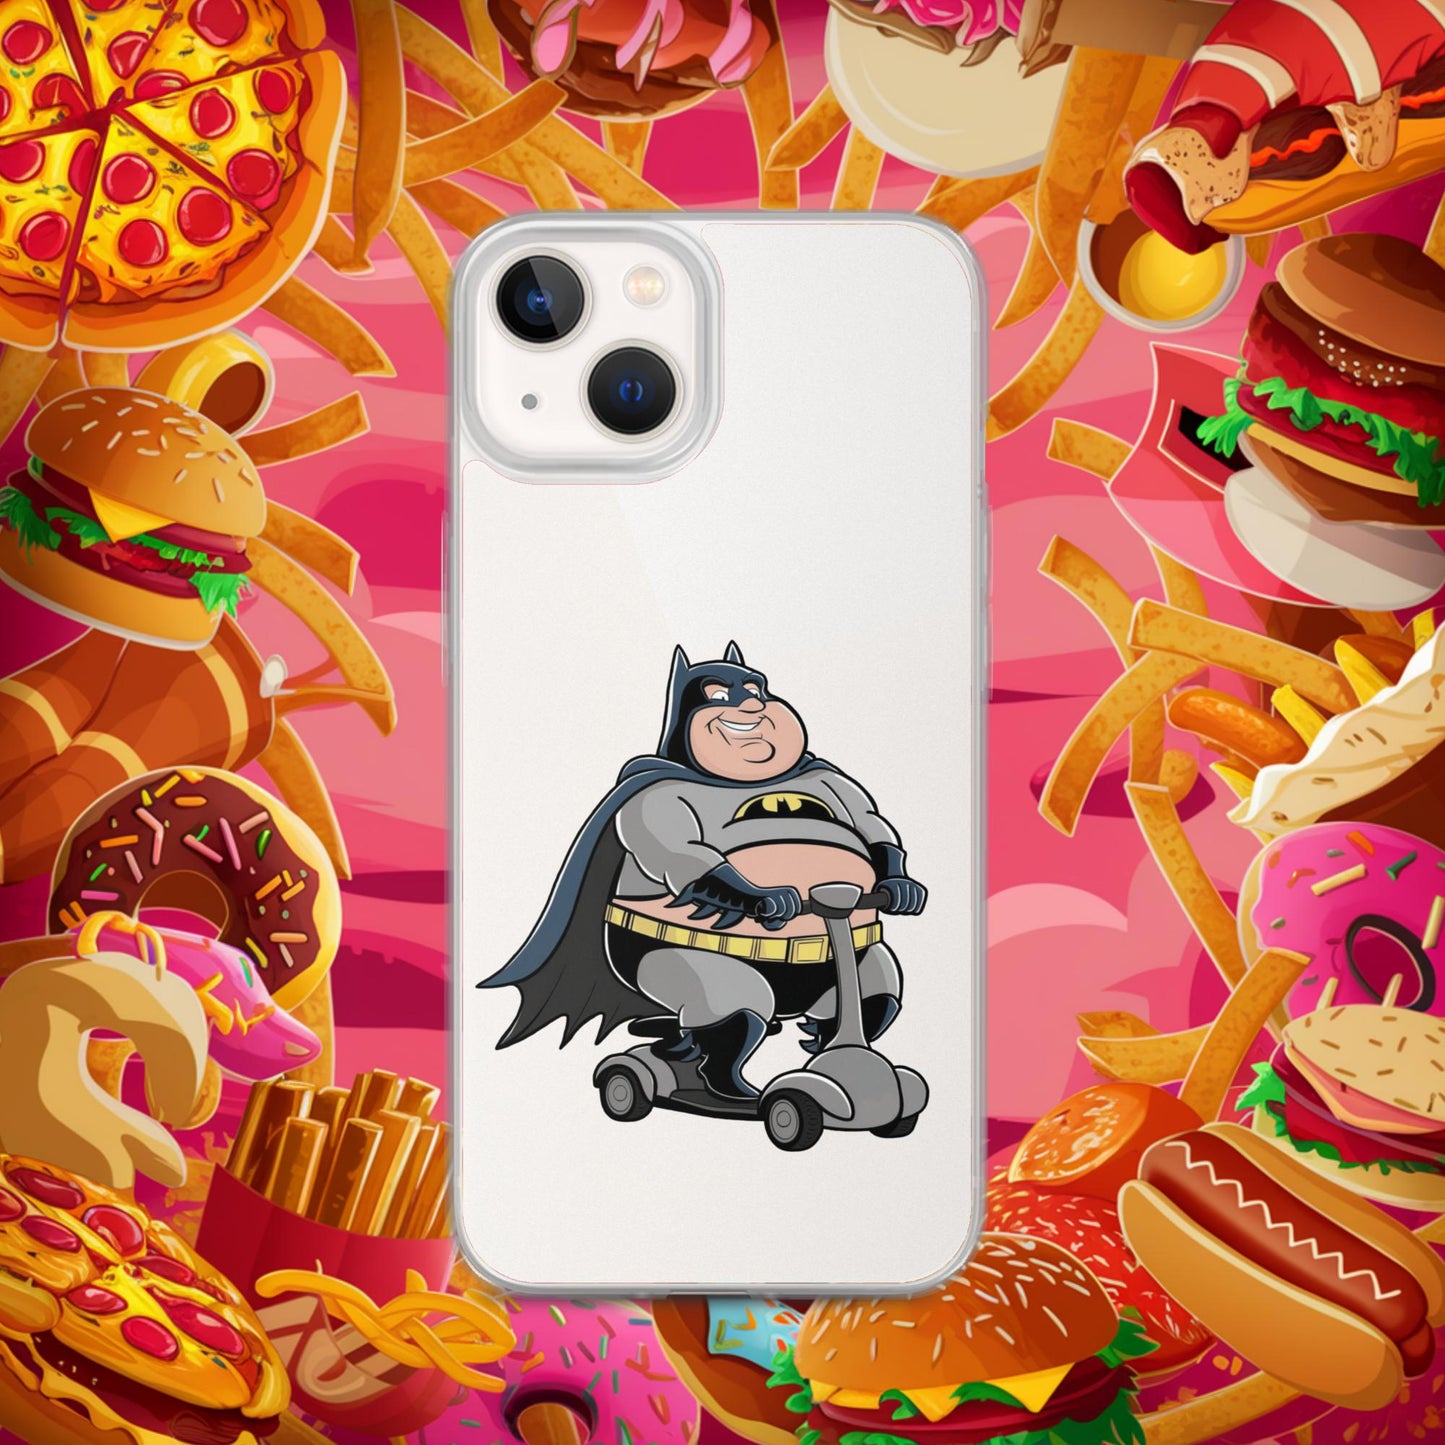 Fatman Fat Superhero Funny Clear Case for iPhone Next Cult Brand